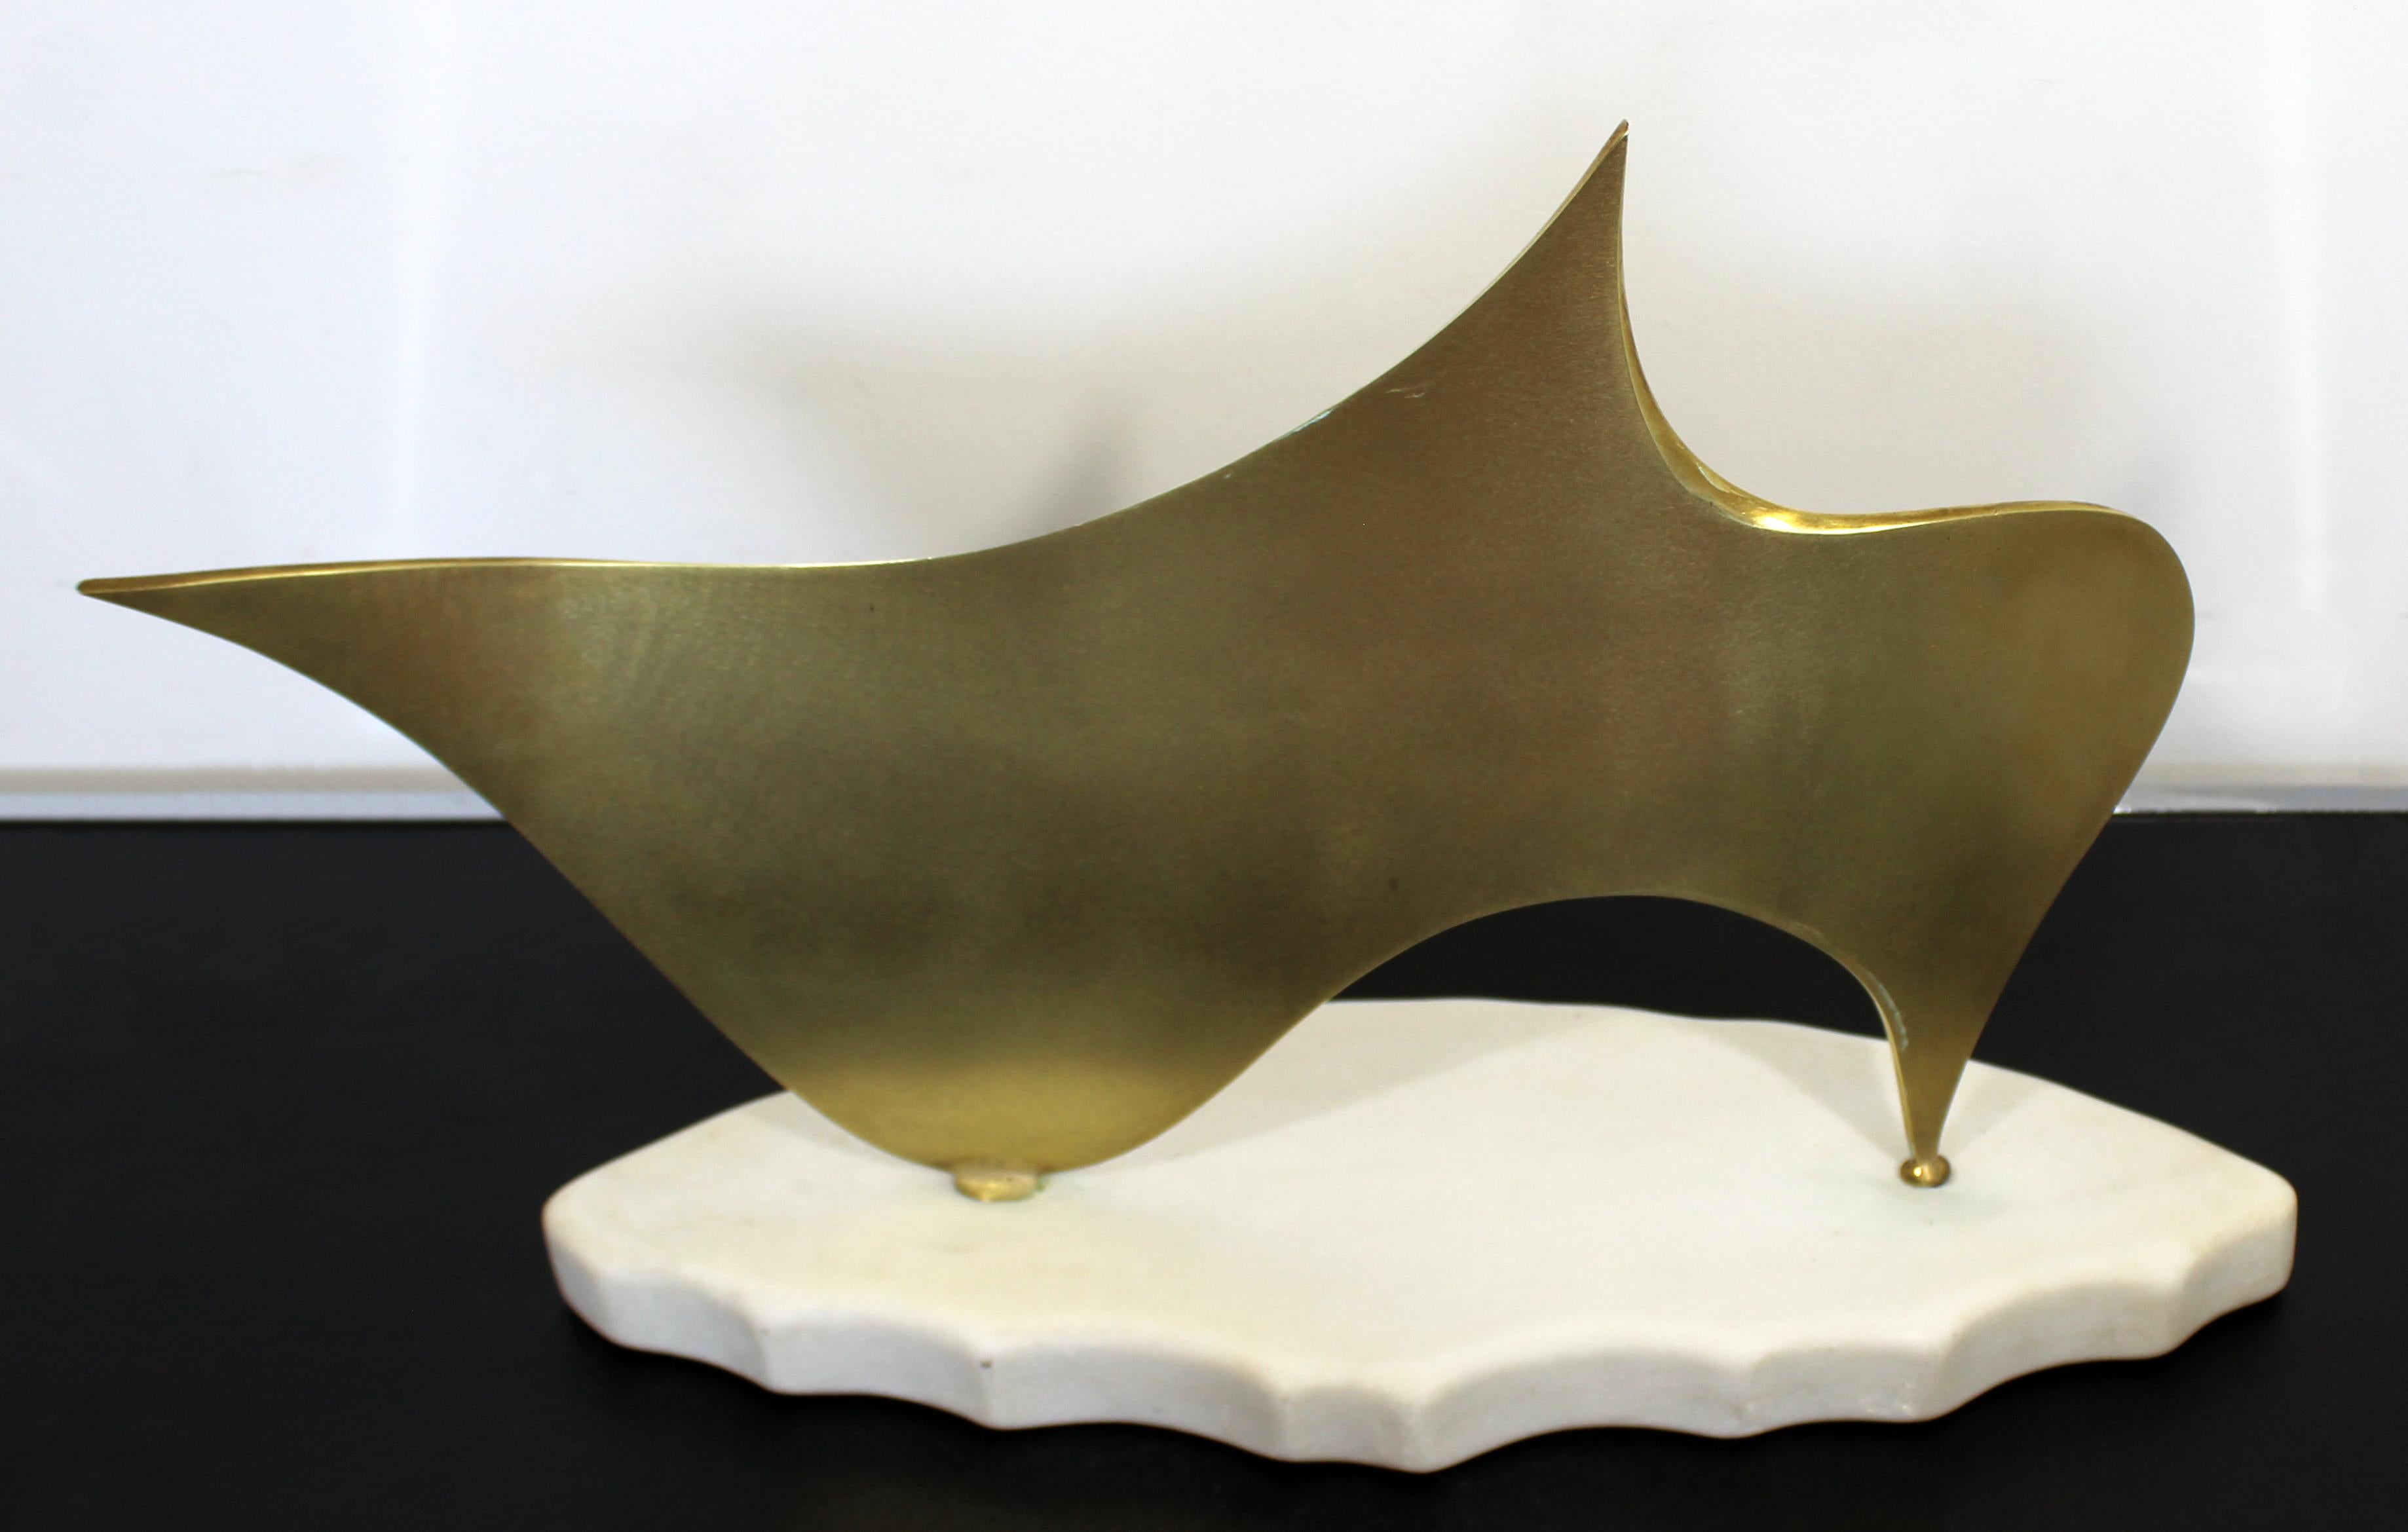 For your consideration is a gorgeous gold abstract wave sculpture on a marble base titled 